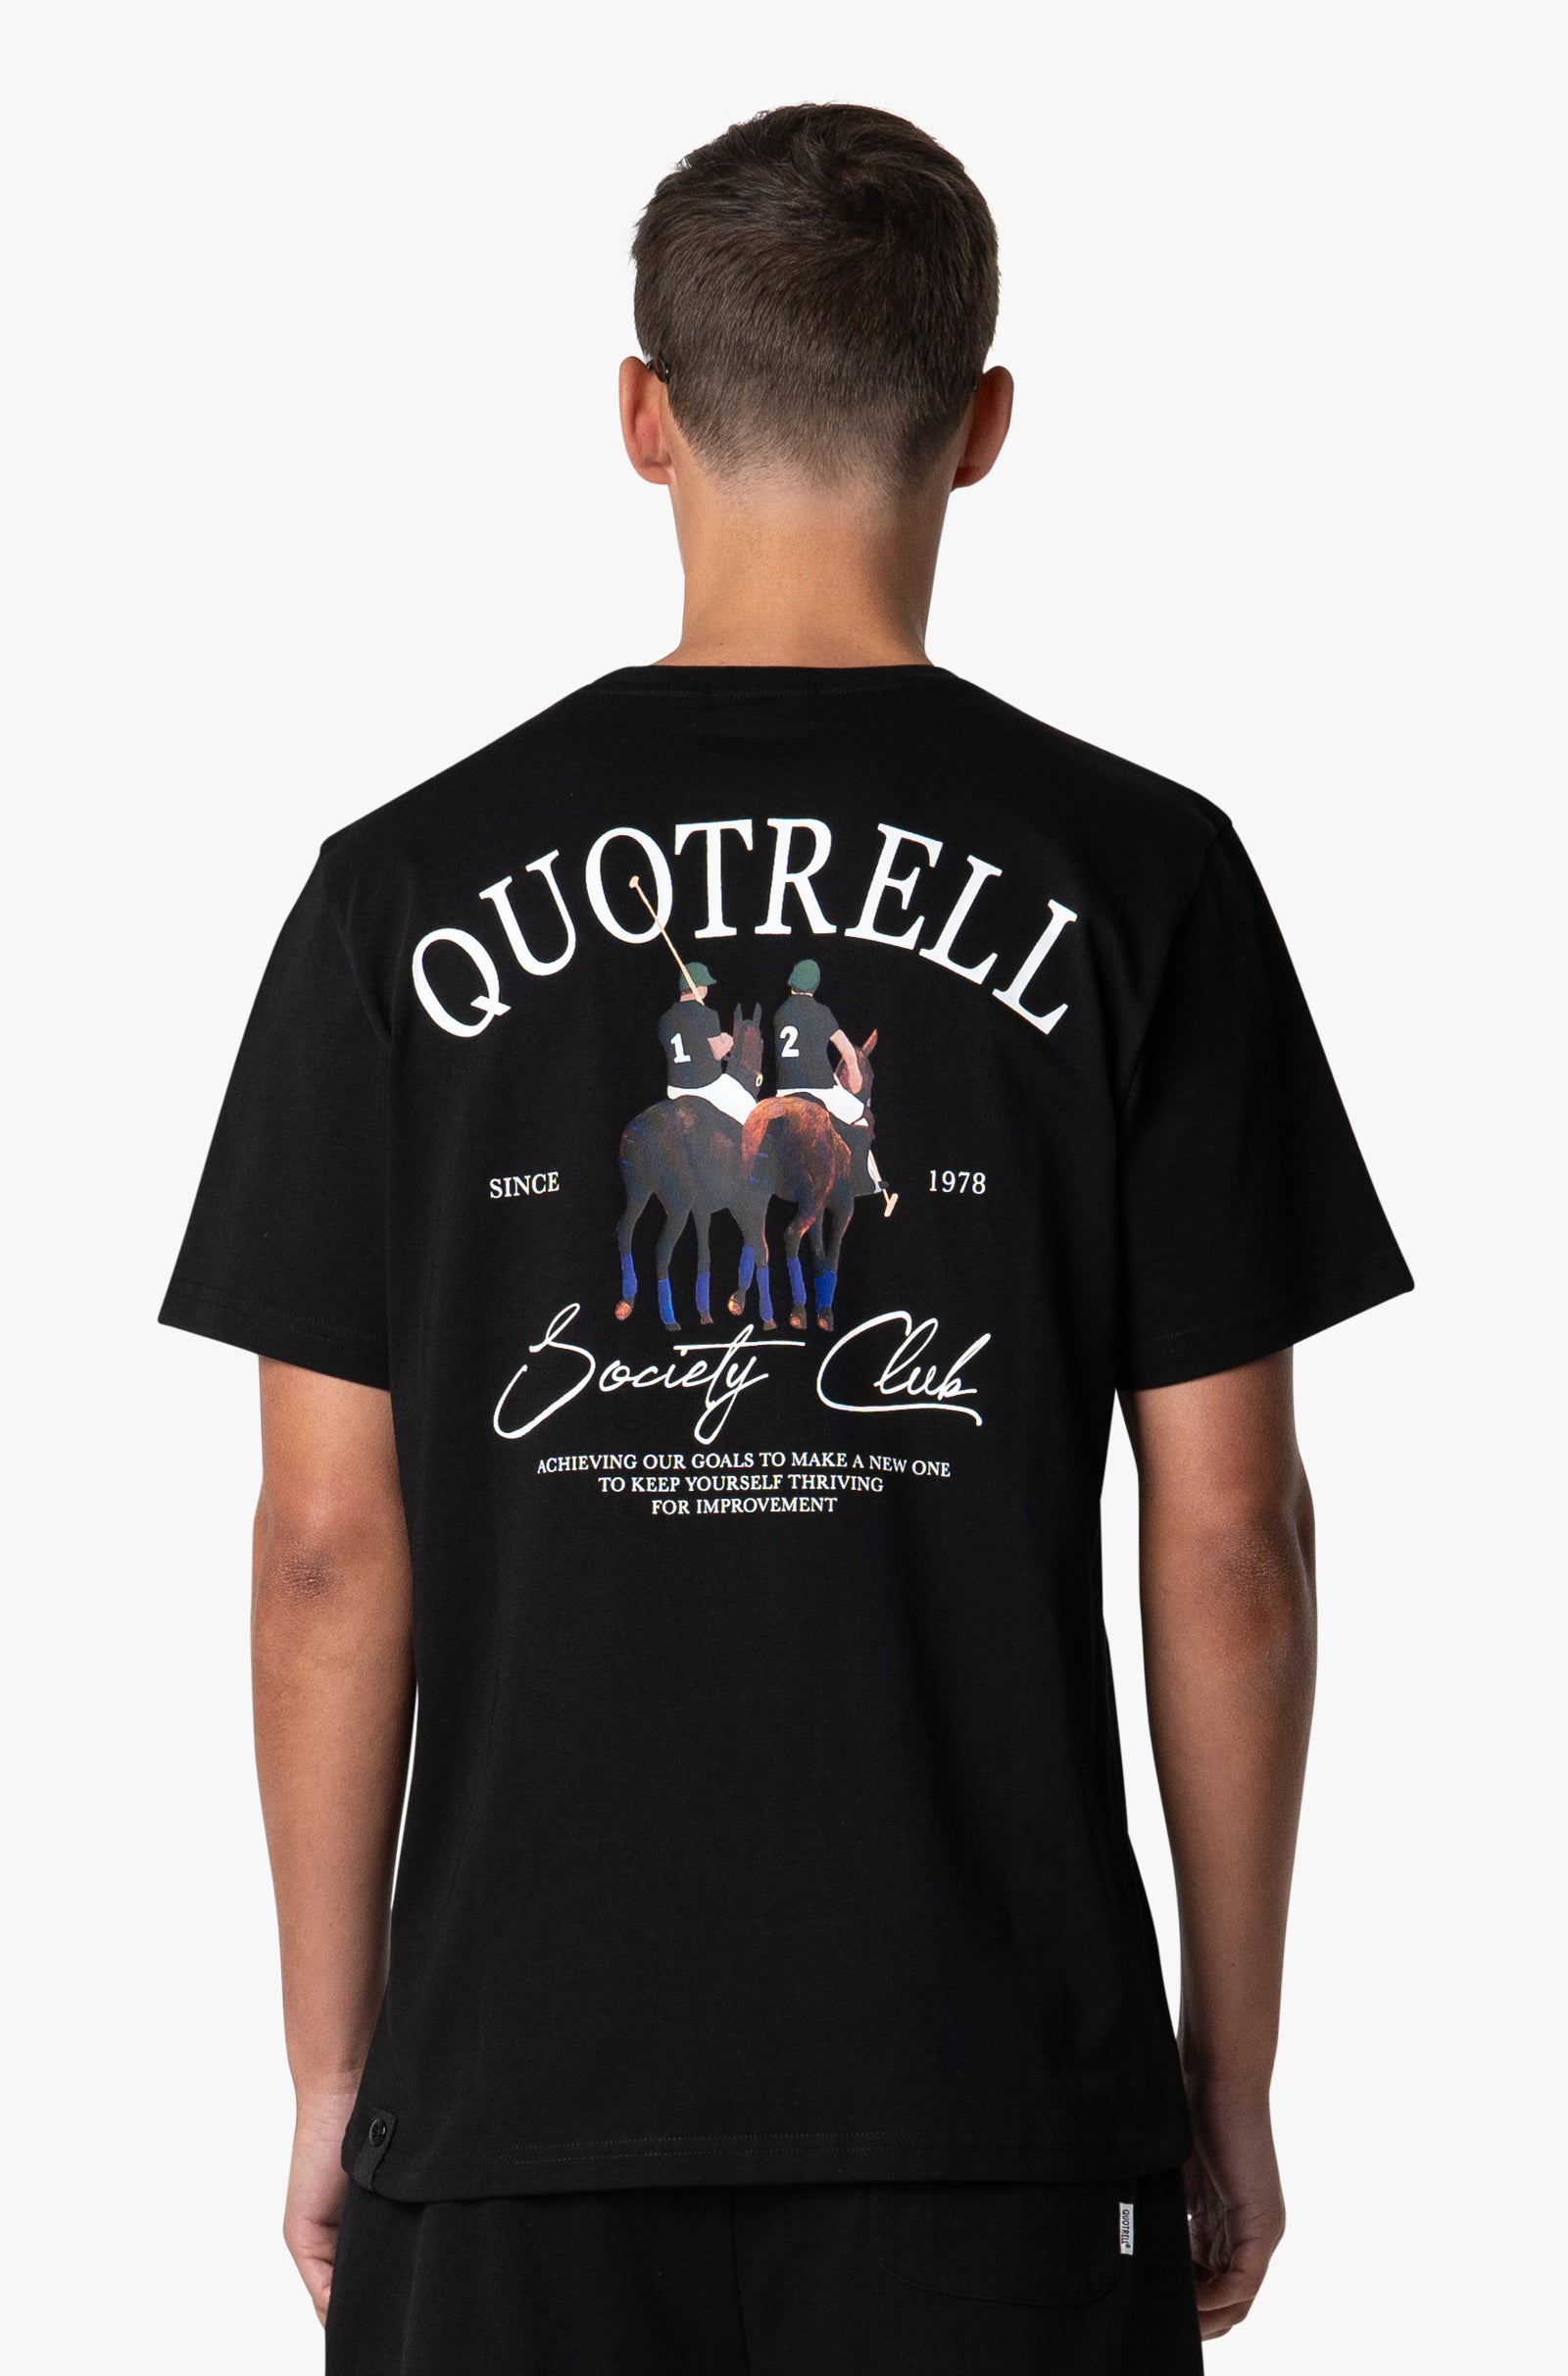 Quotrell Victorie T-shirt